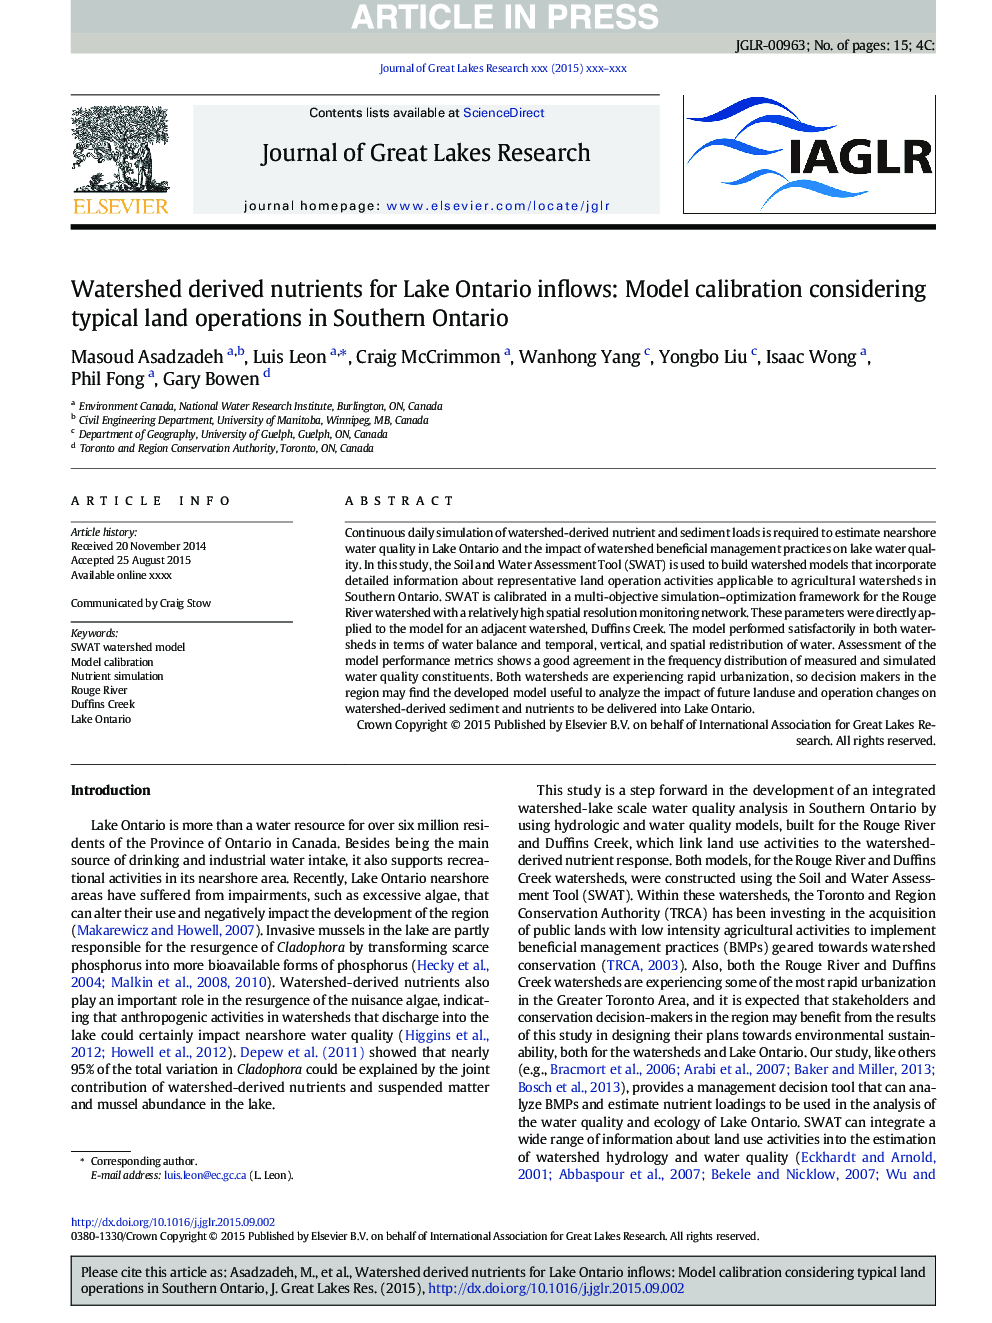 Watershed derived nutrients for Lake Ontario inflows: Model calibration considering typical land operations in Southern Ontario